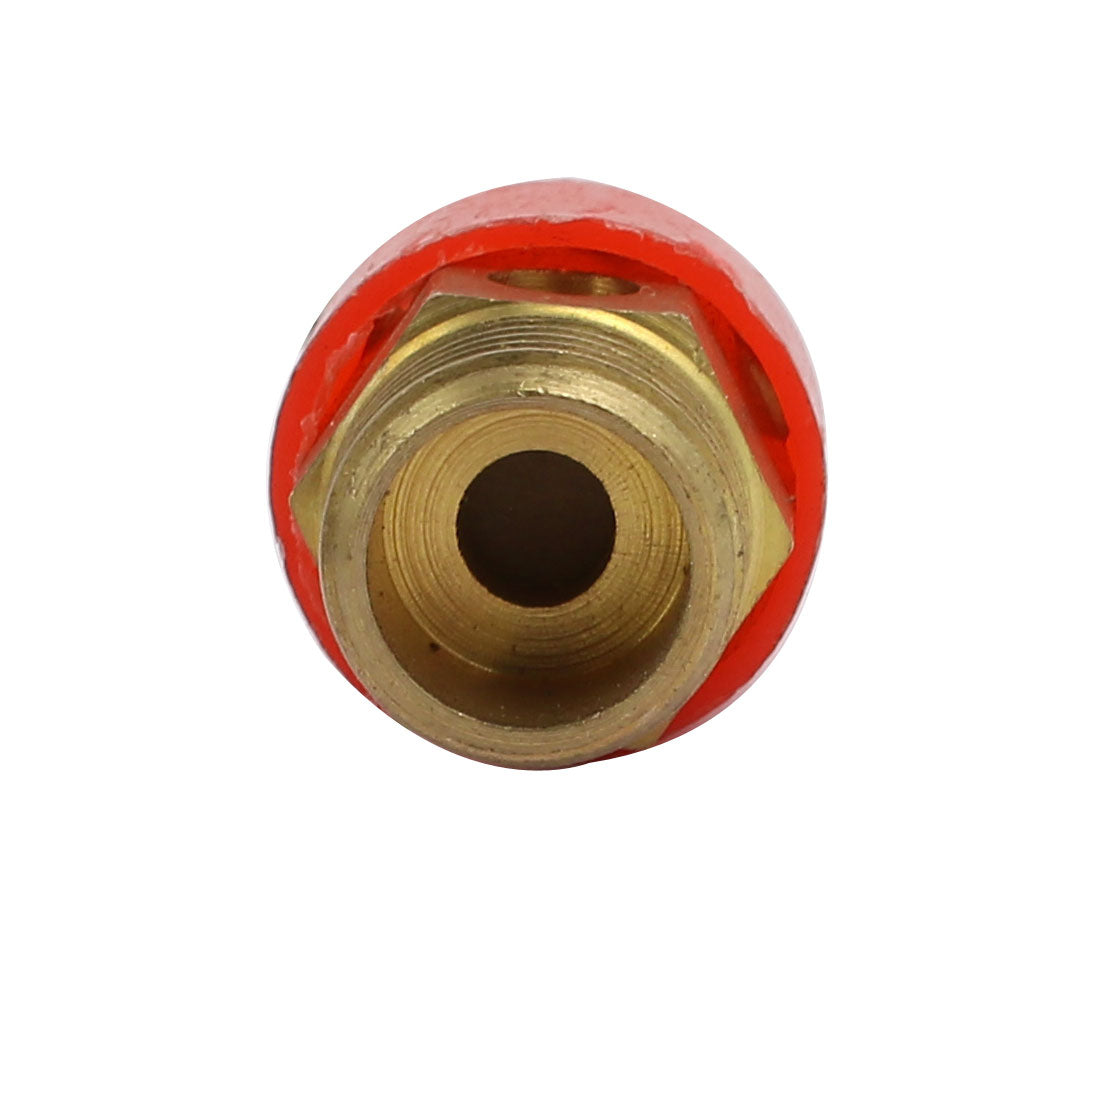 uxcell Uxcell 1/4BSP Air Compressor Pressure Relief Safety Valves Pneumatic Fitting Gold Tone